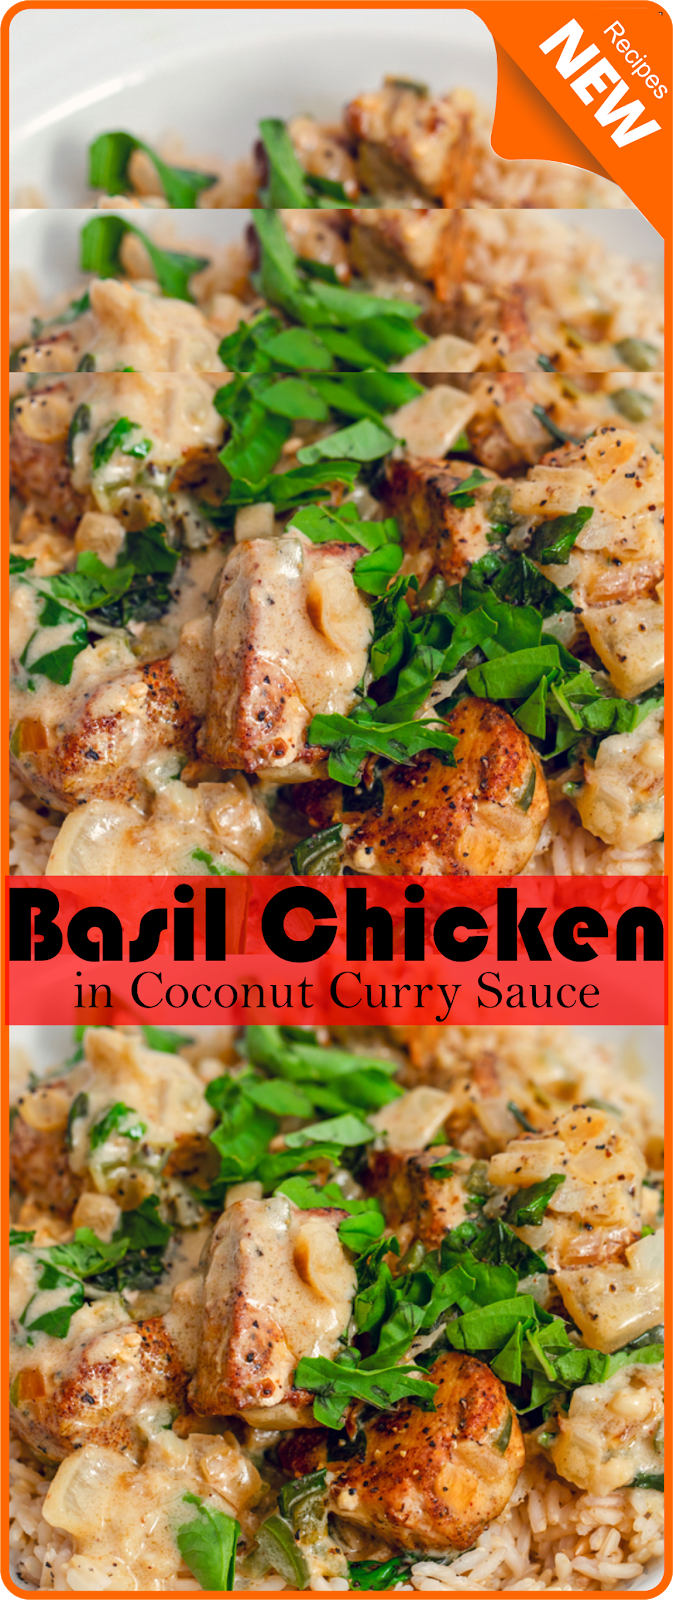 Basil Chicken in Coconut Curry Sauce | Think food